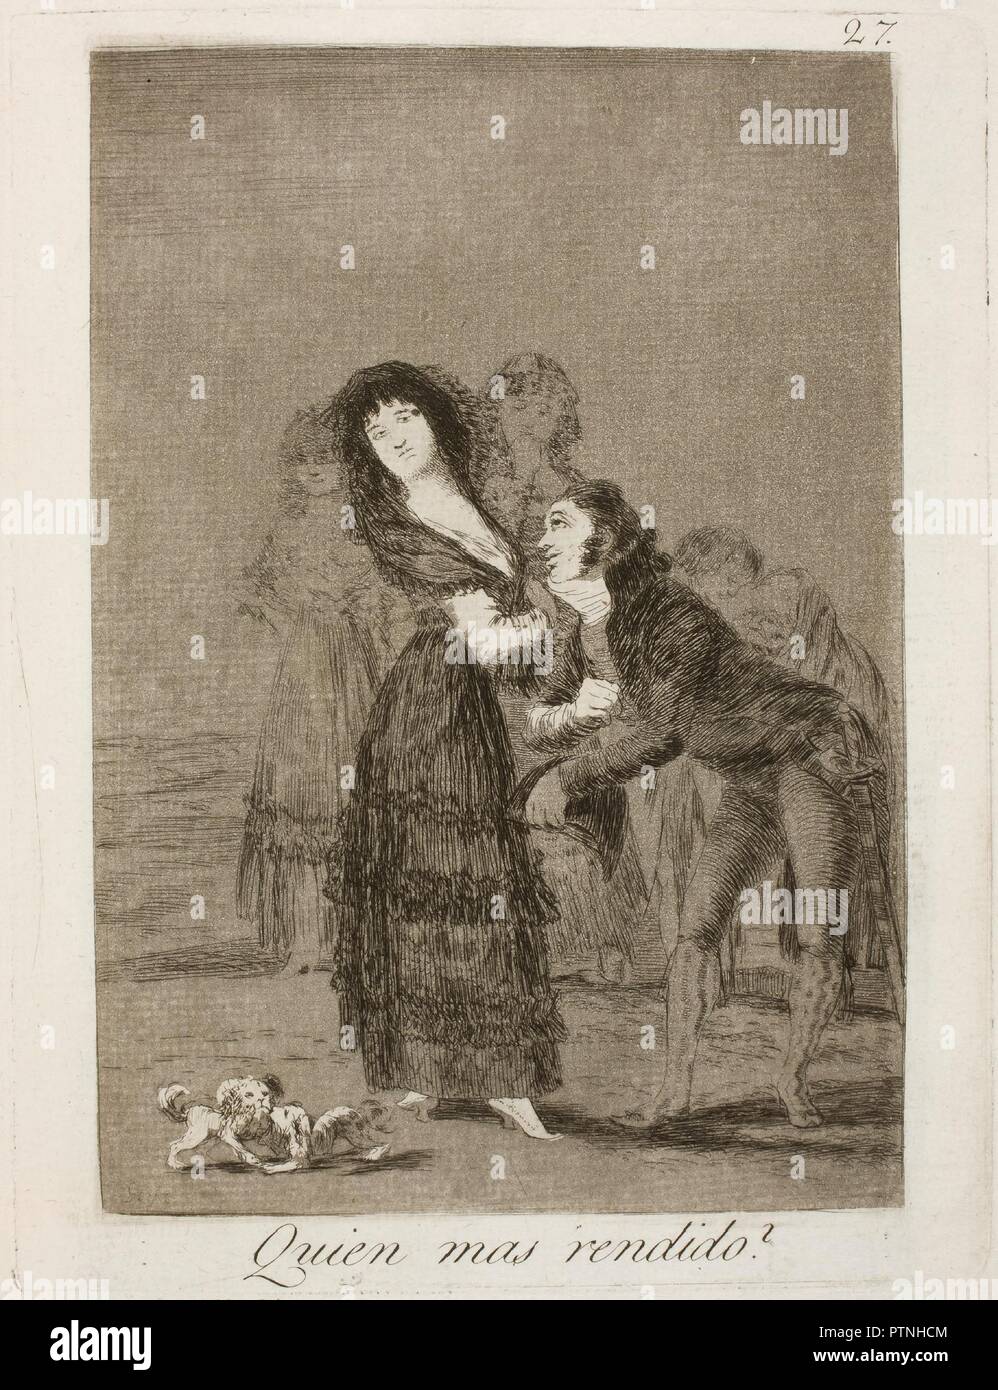 Francisco de Goya y Lucientes / 'Who could be more admiring?'. 1797 - 1799. Etching, Aquatint, Drypoint on ivory laid paper. Museum: Museo del Prado, Madrid, España. Stock Photo